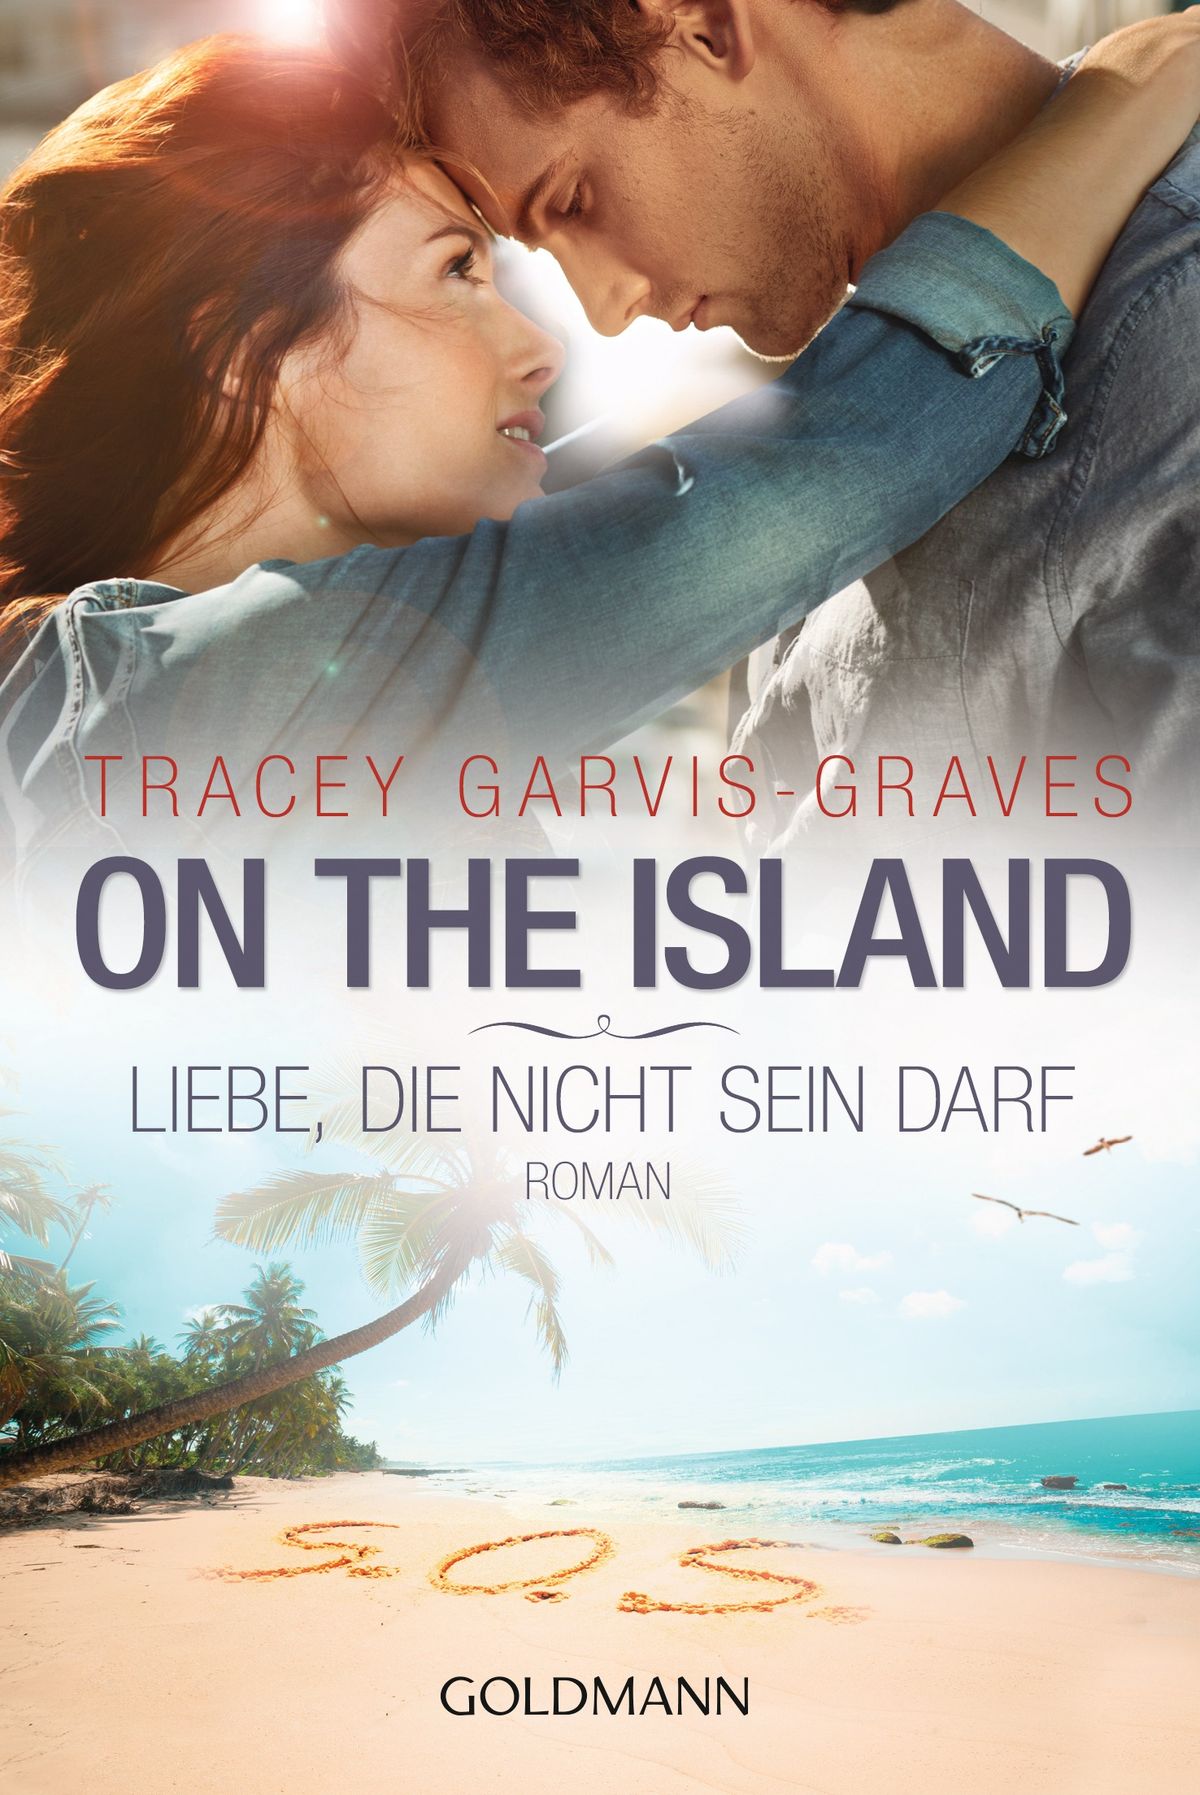 Book Review of On The Island by Tracy Garvis Graves